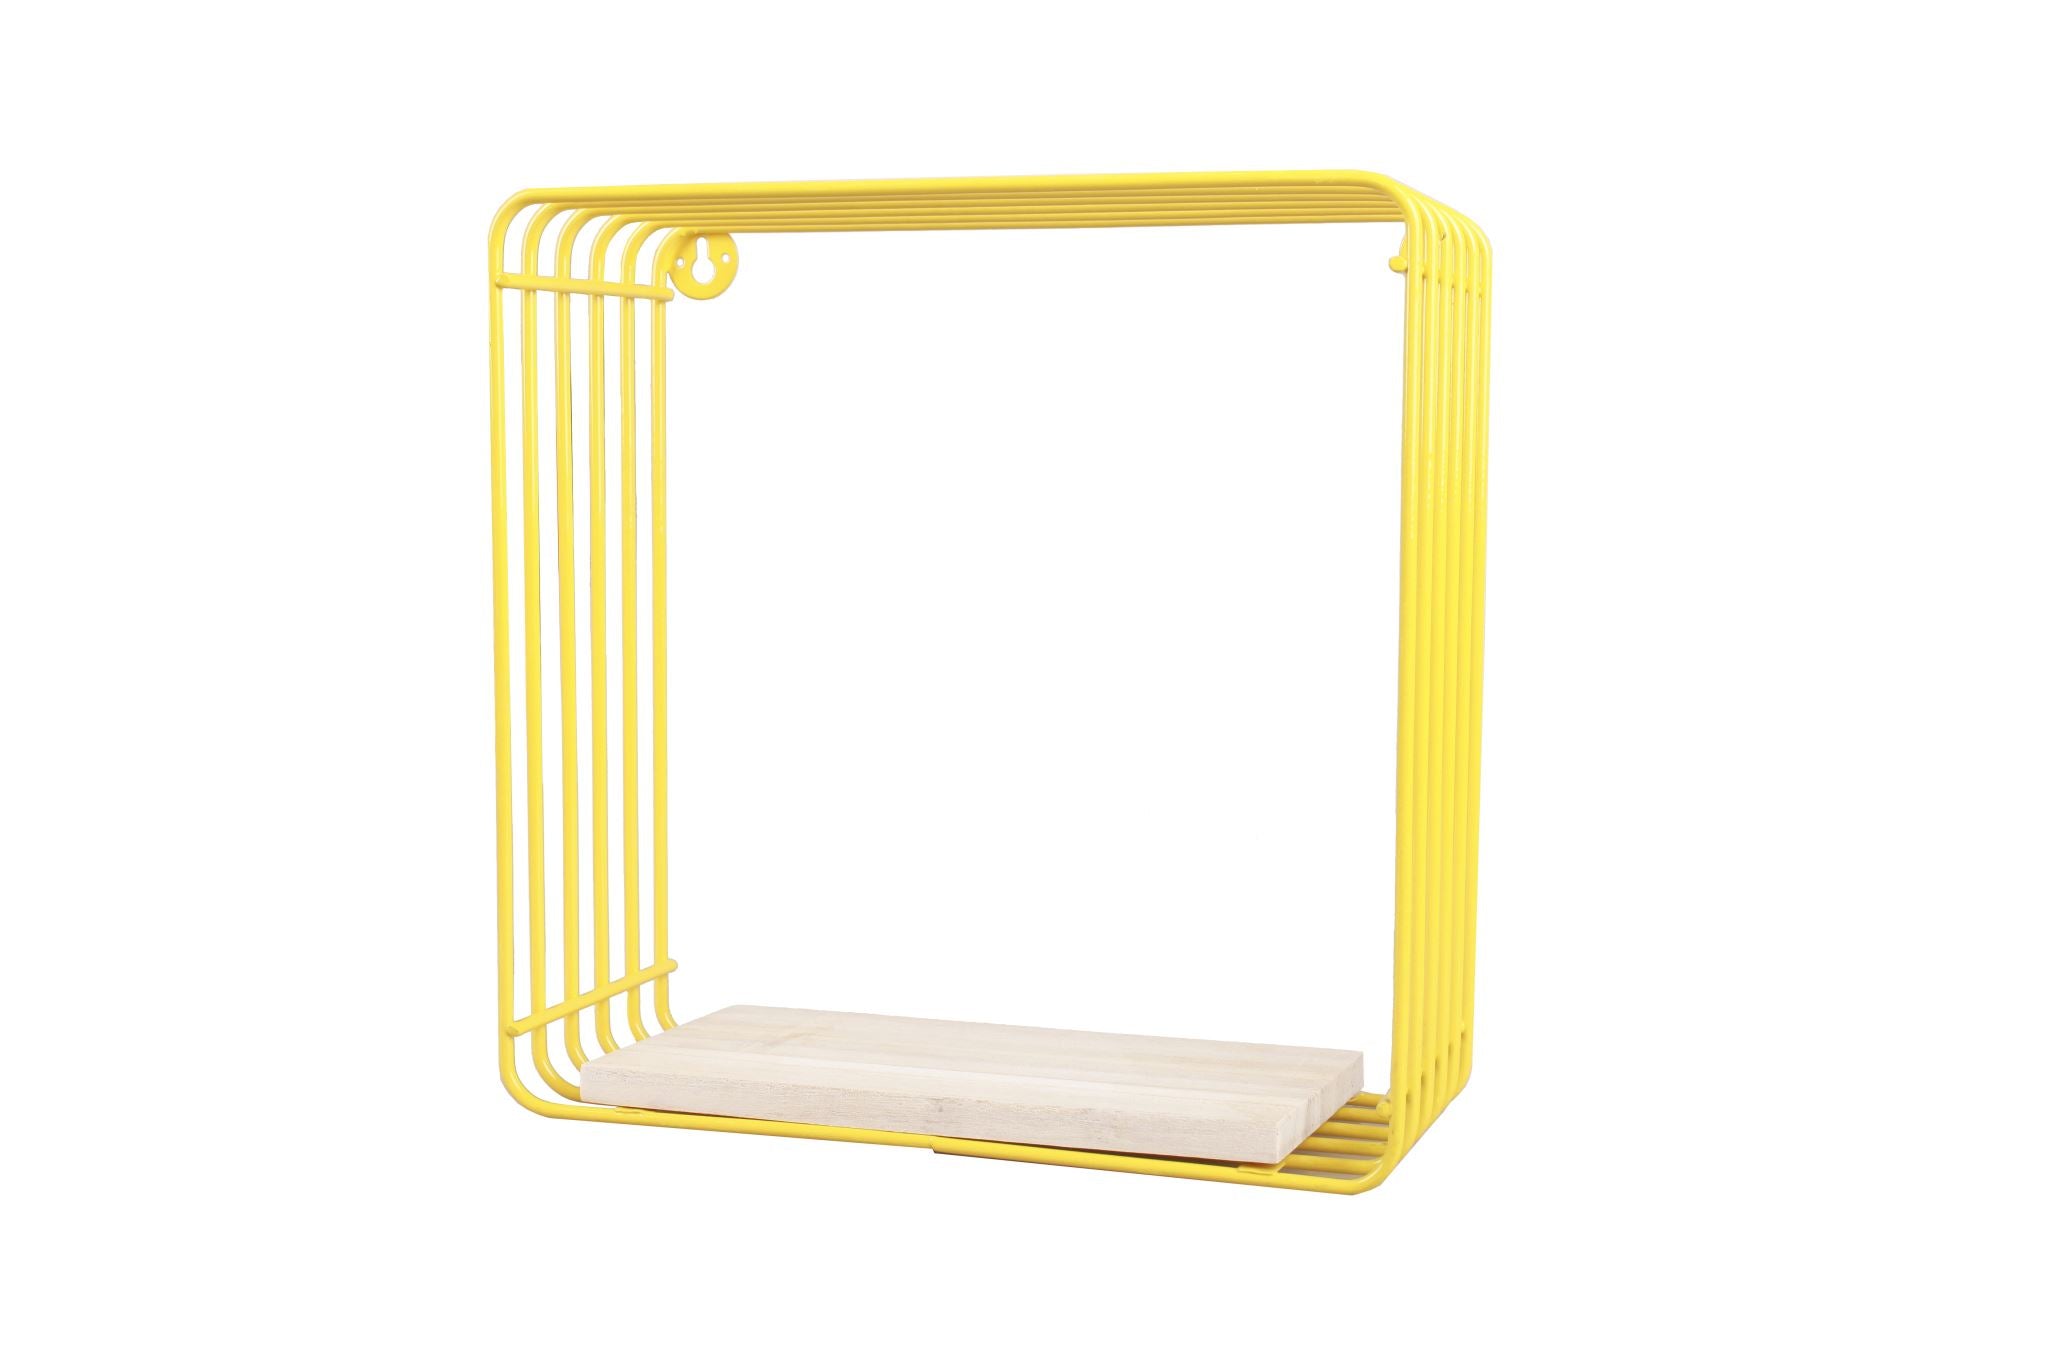 DS BS Wall Mounted Metal Wire Cube Display Decor Shelf